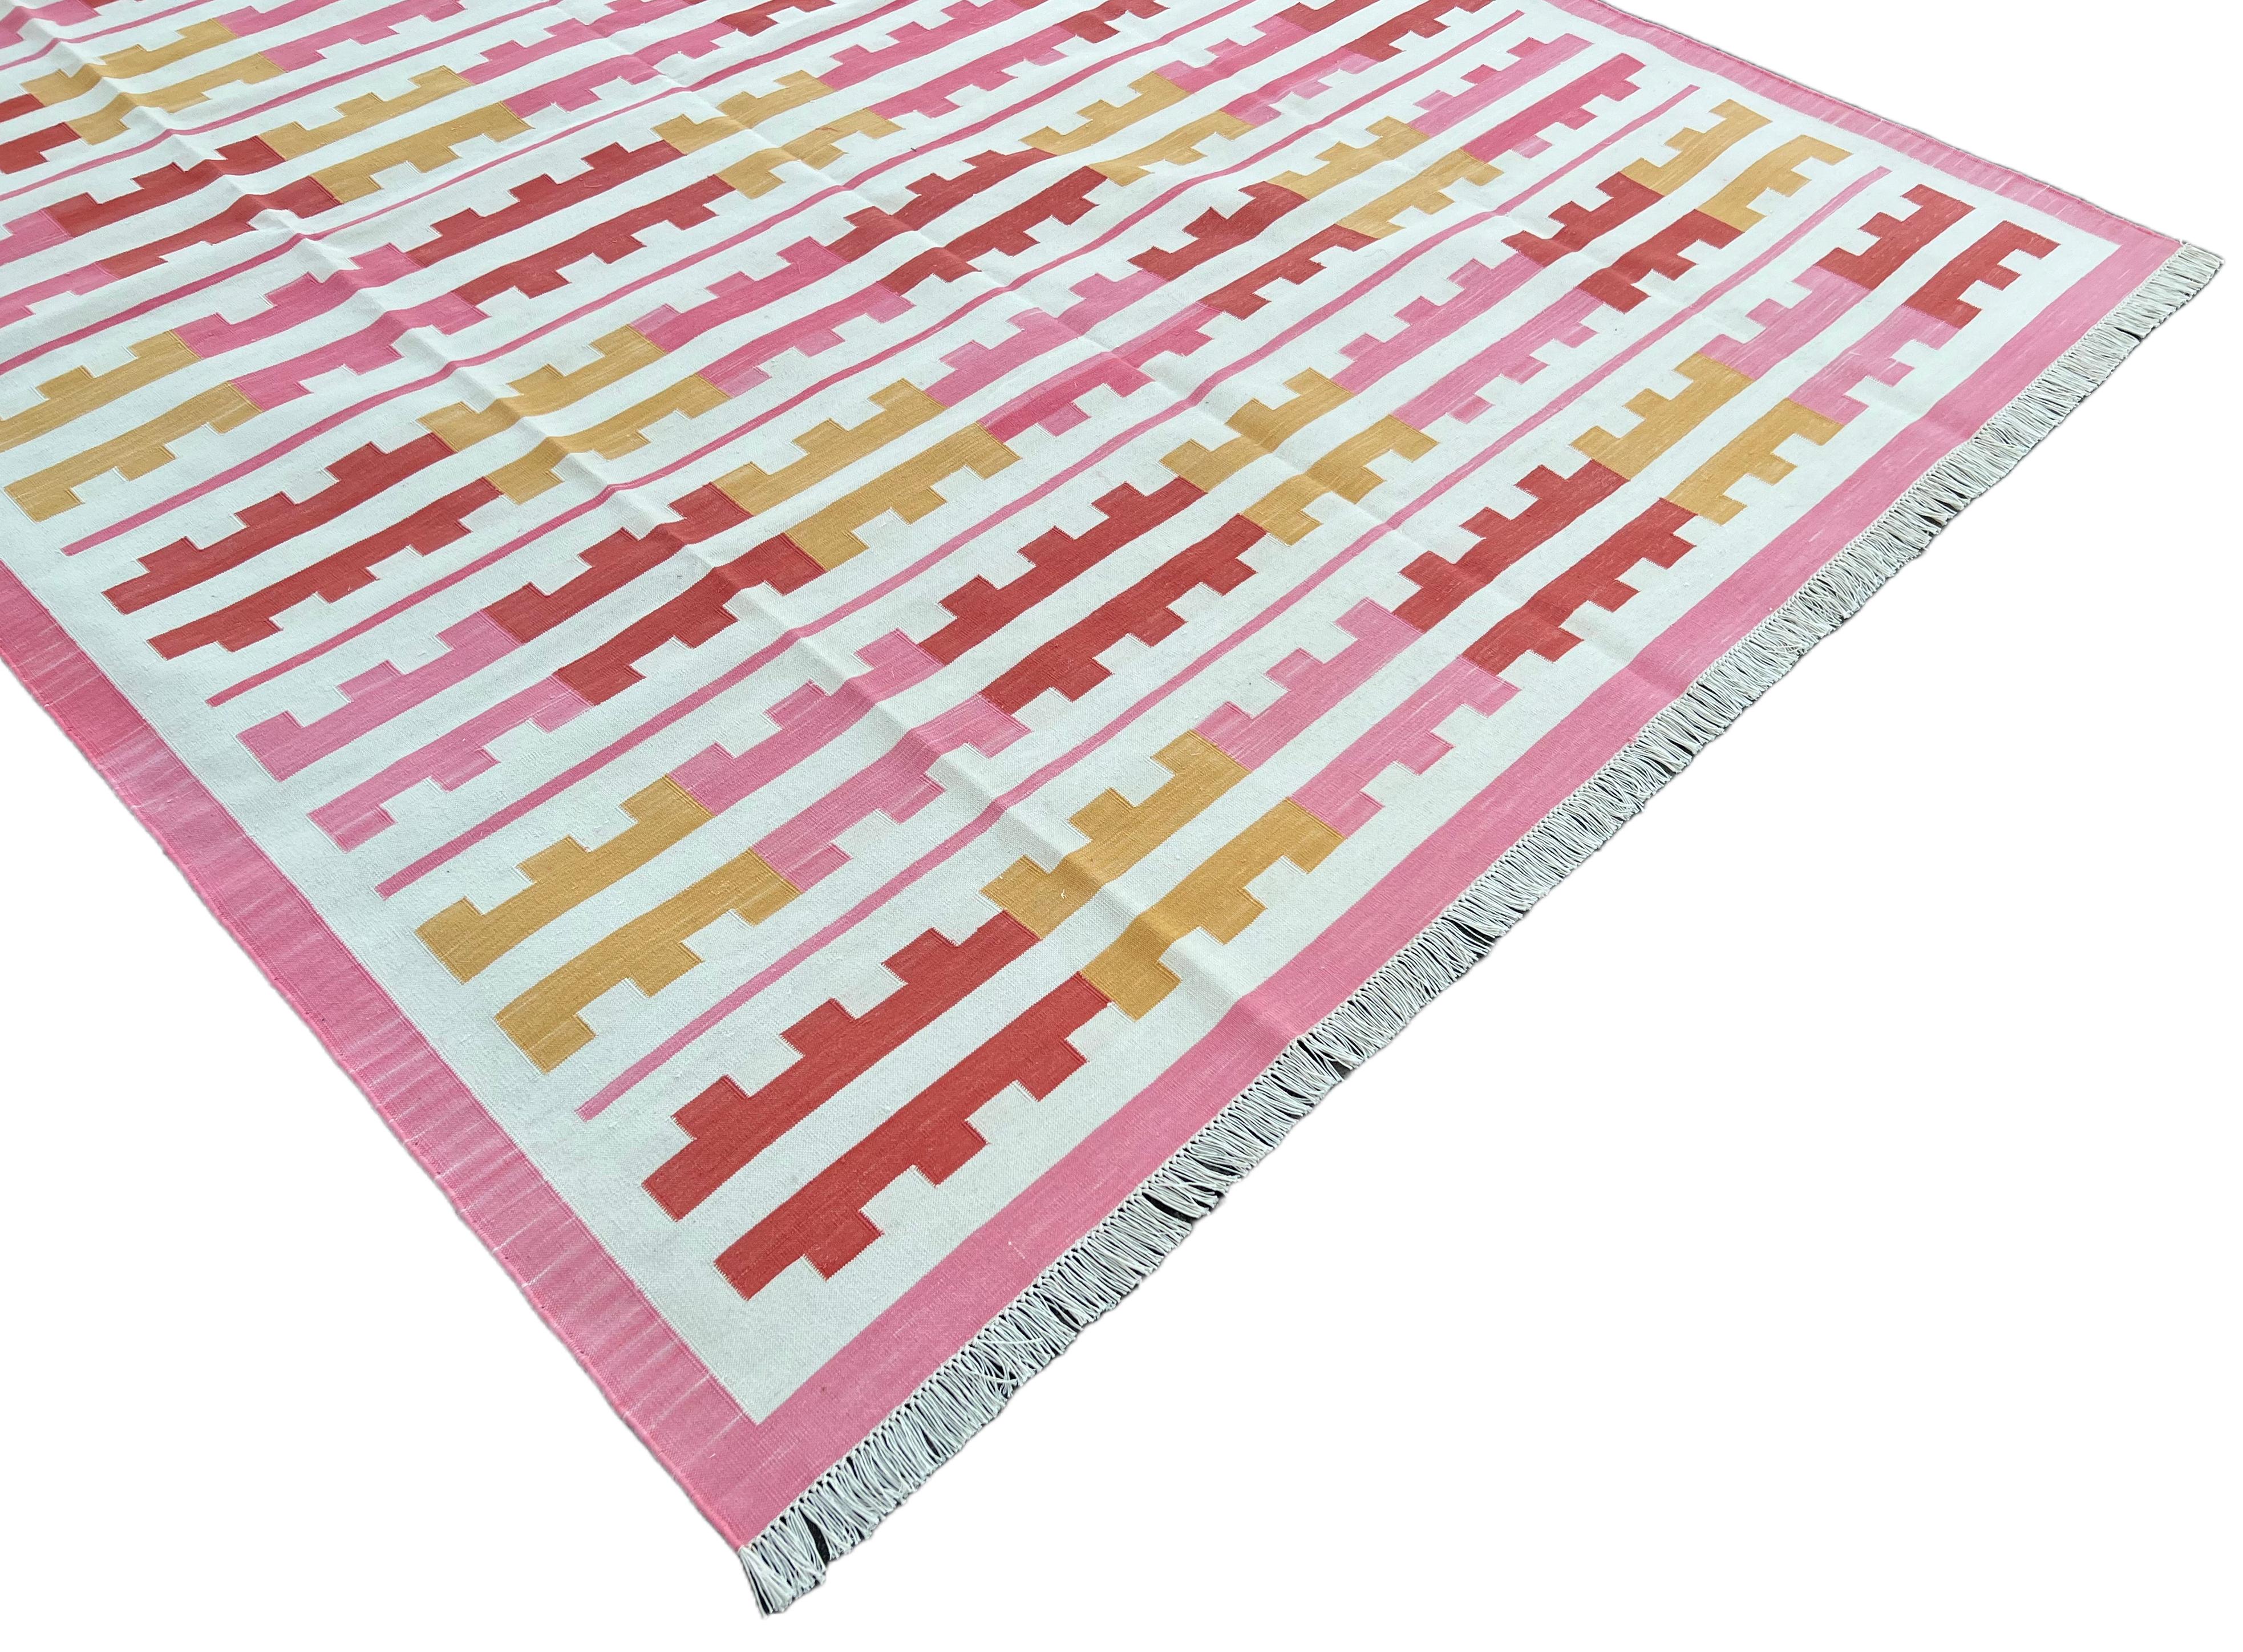 Hand-Woven Handmade Cotton Area Flat Weave Rug, 6x9 Pink And Yellow Striped Indian Dhurrie For Sale